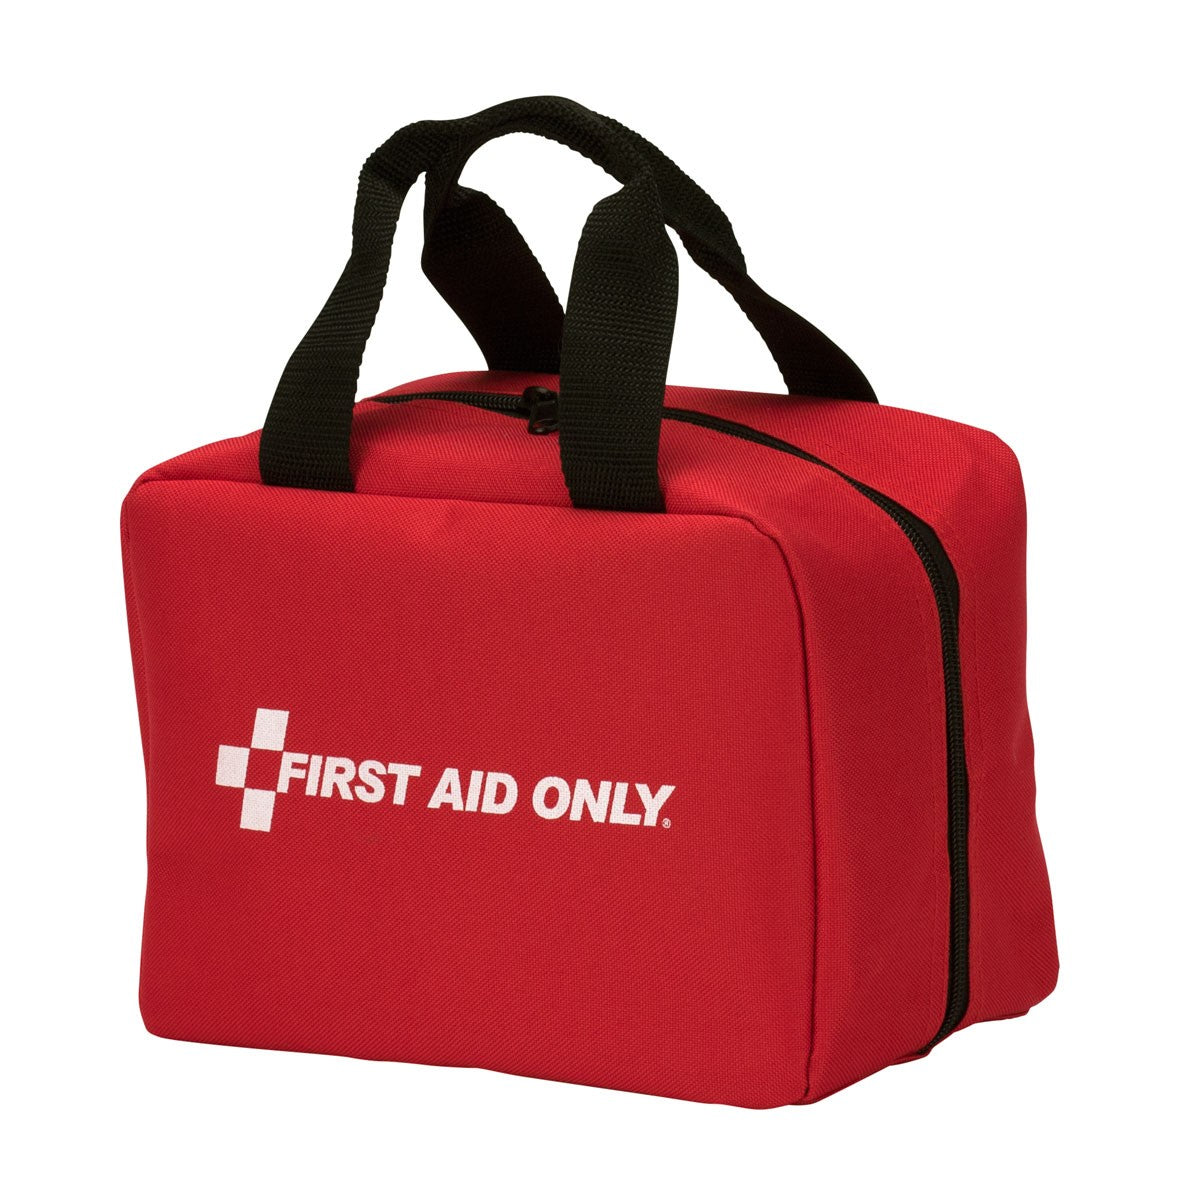 50 Person Bulk Fabric First Aid Kit, ANSI Compliant - W-90599